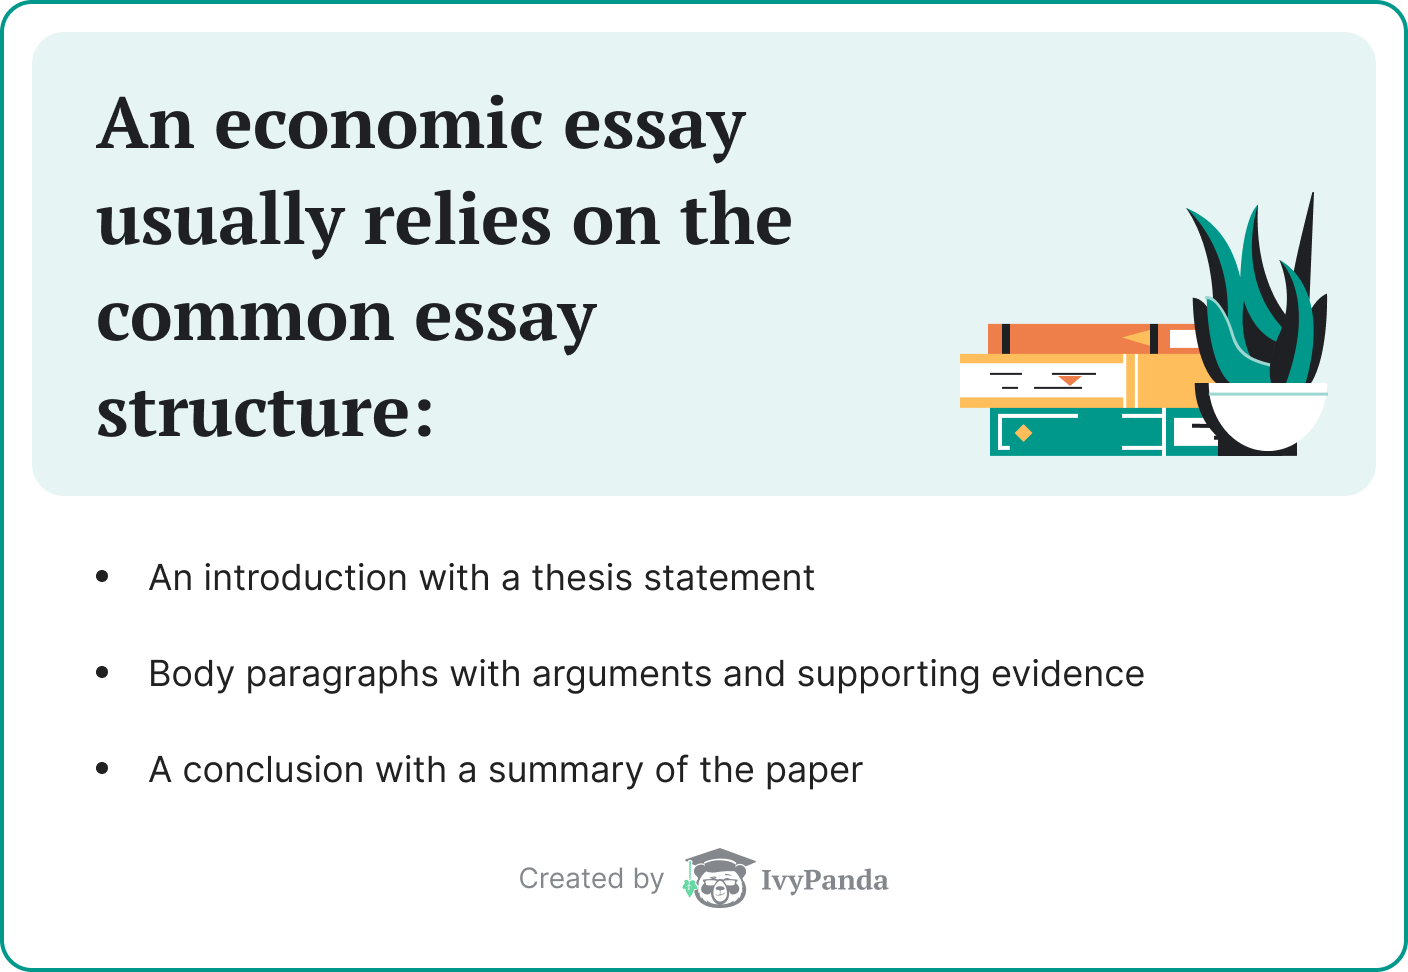 An economic essay usually relies on the common essay structure.